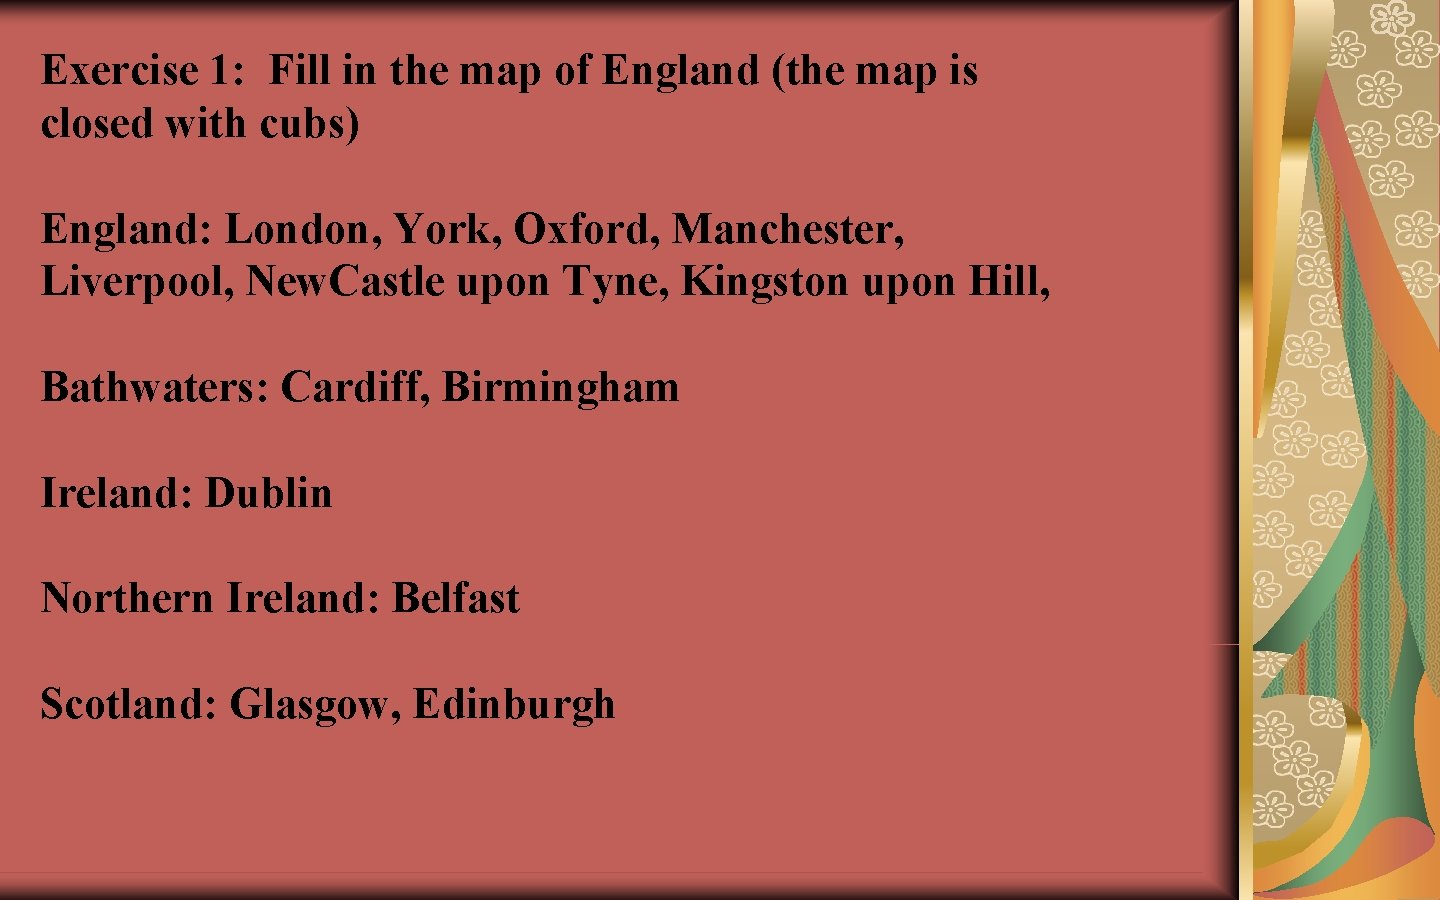 Exercise 1: Fill in the map of England (the map is closed with cubs)